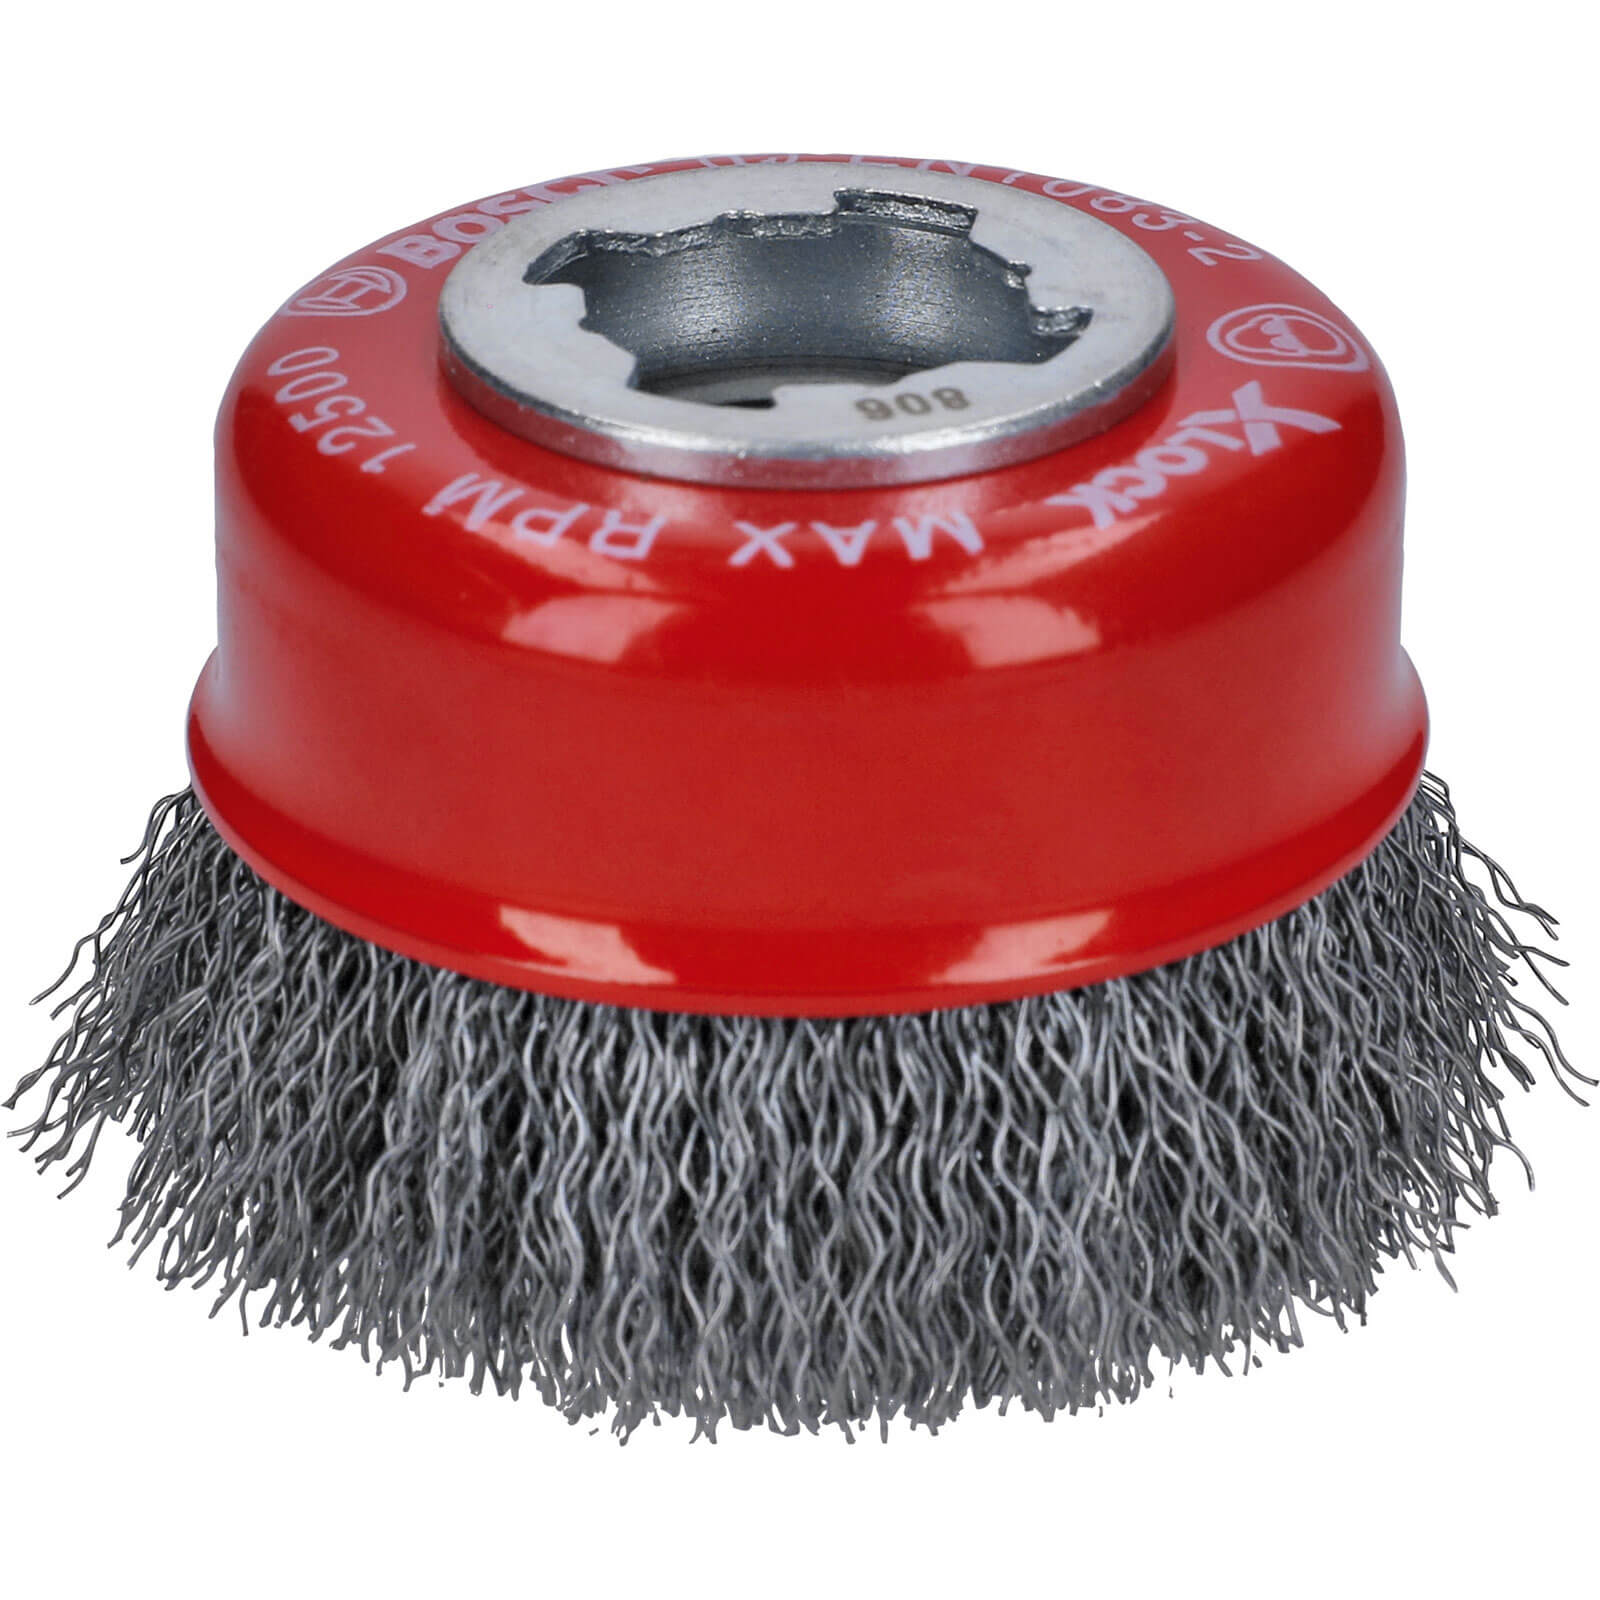 Photos - Power Tool Accessory Bosch X Lock Crimped Steel Wire Cup Brush 75mm X-Lock 2608620725 